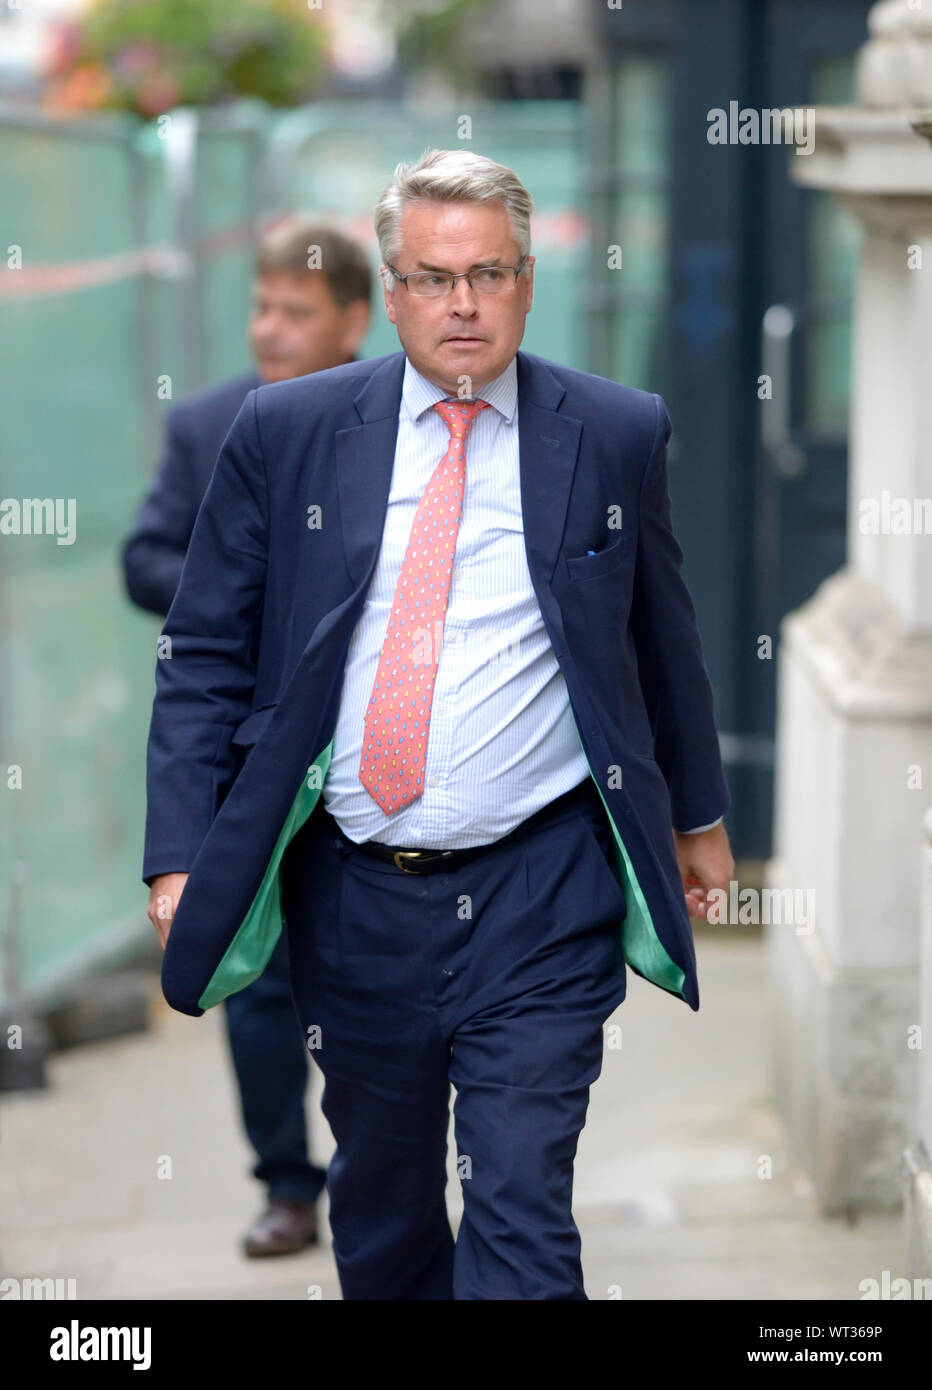 Tim Loughton MP (Con: East Worthing and Shoreham) arrives in Downing Street  for a gathering at Number 10, 2nd September 2019 Stock Photo - Alamy